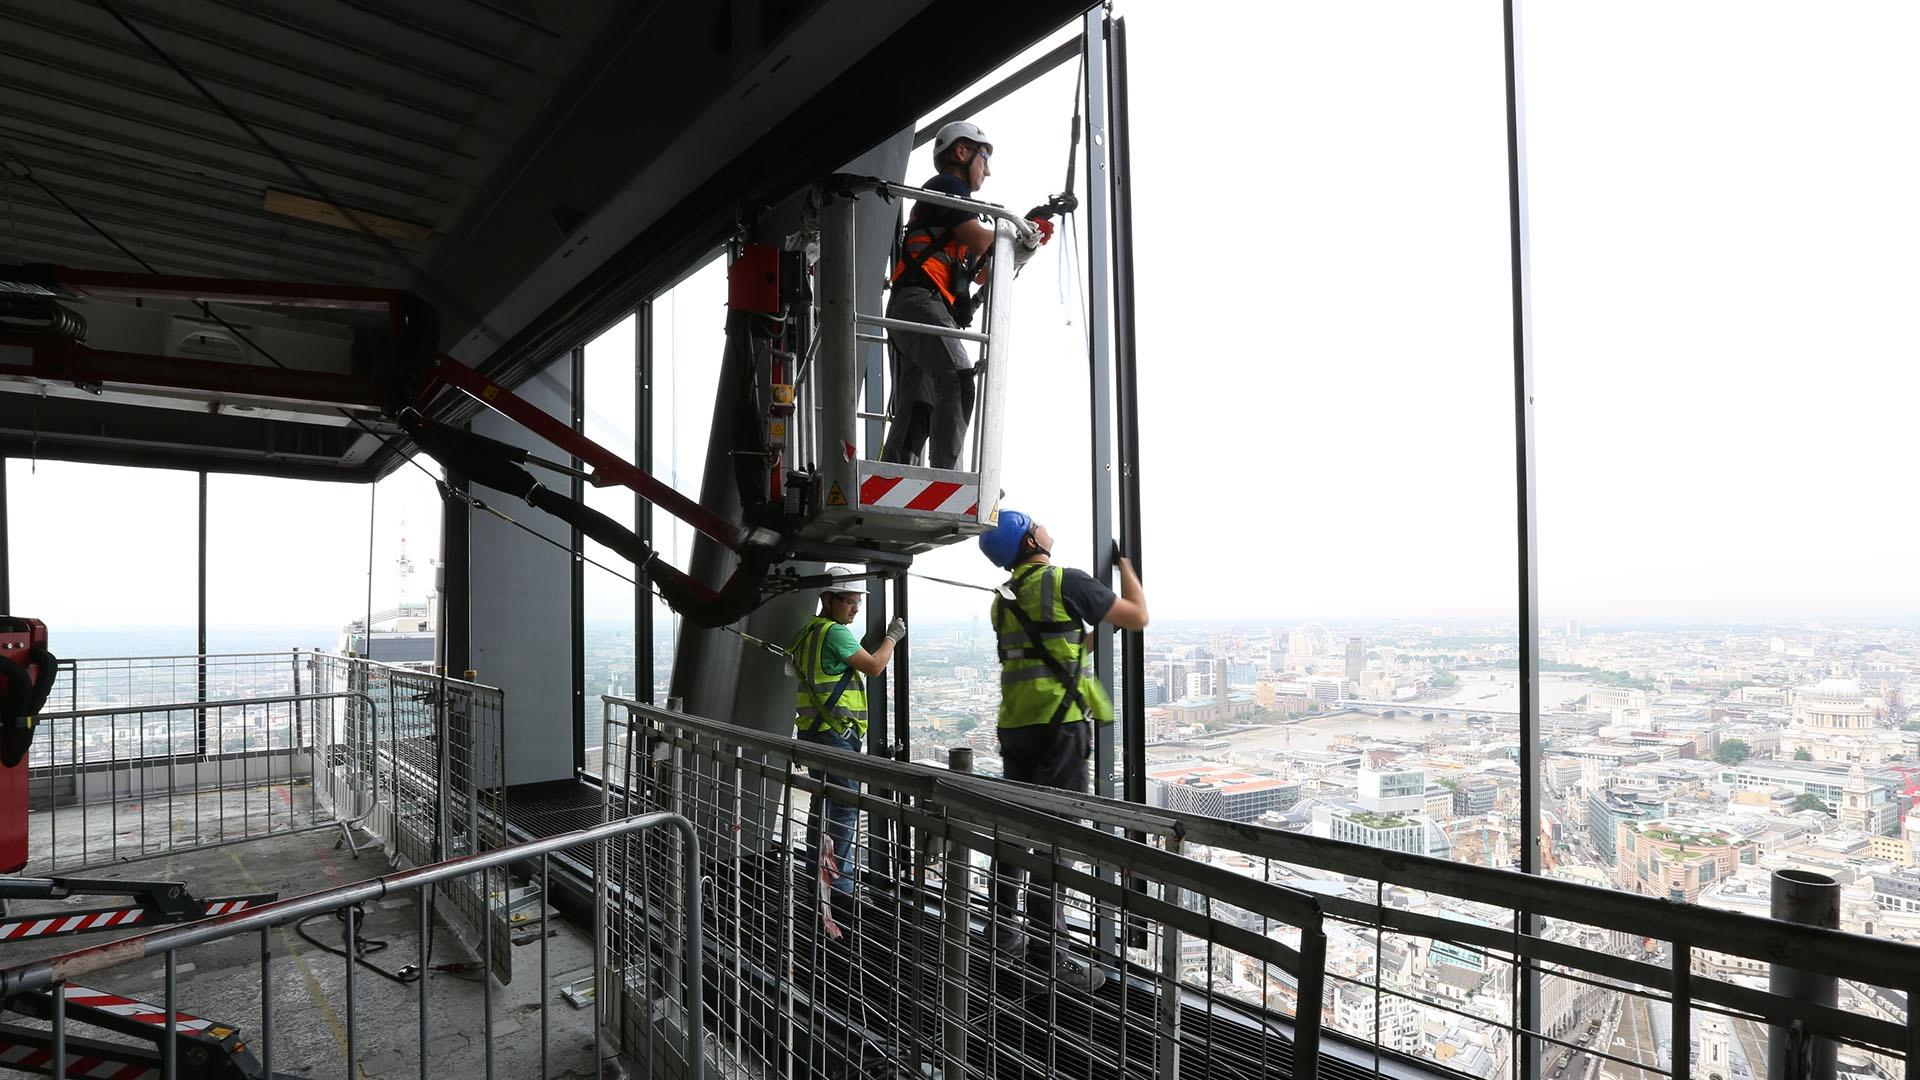 Image of the Leadenhall Building